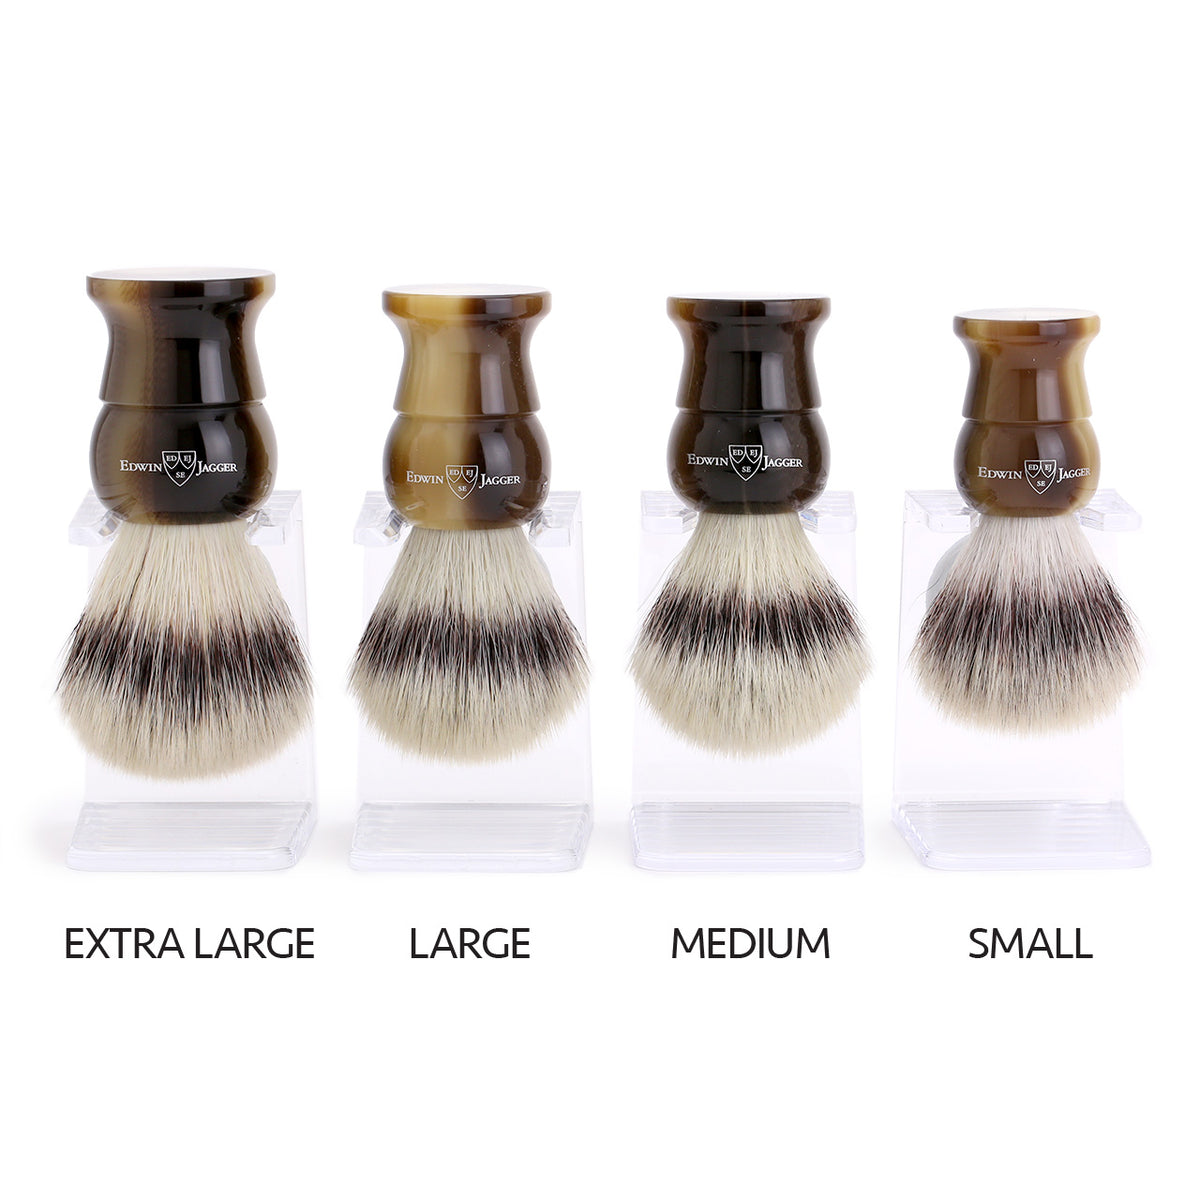 Edwin Jagger Cruelty Free Horn shaving brushes comparison of 4 sizes